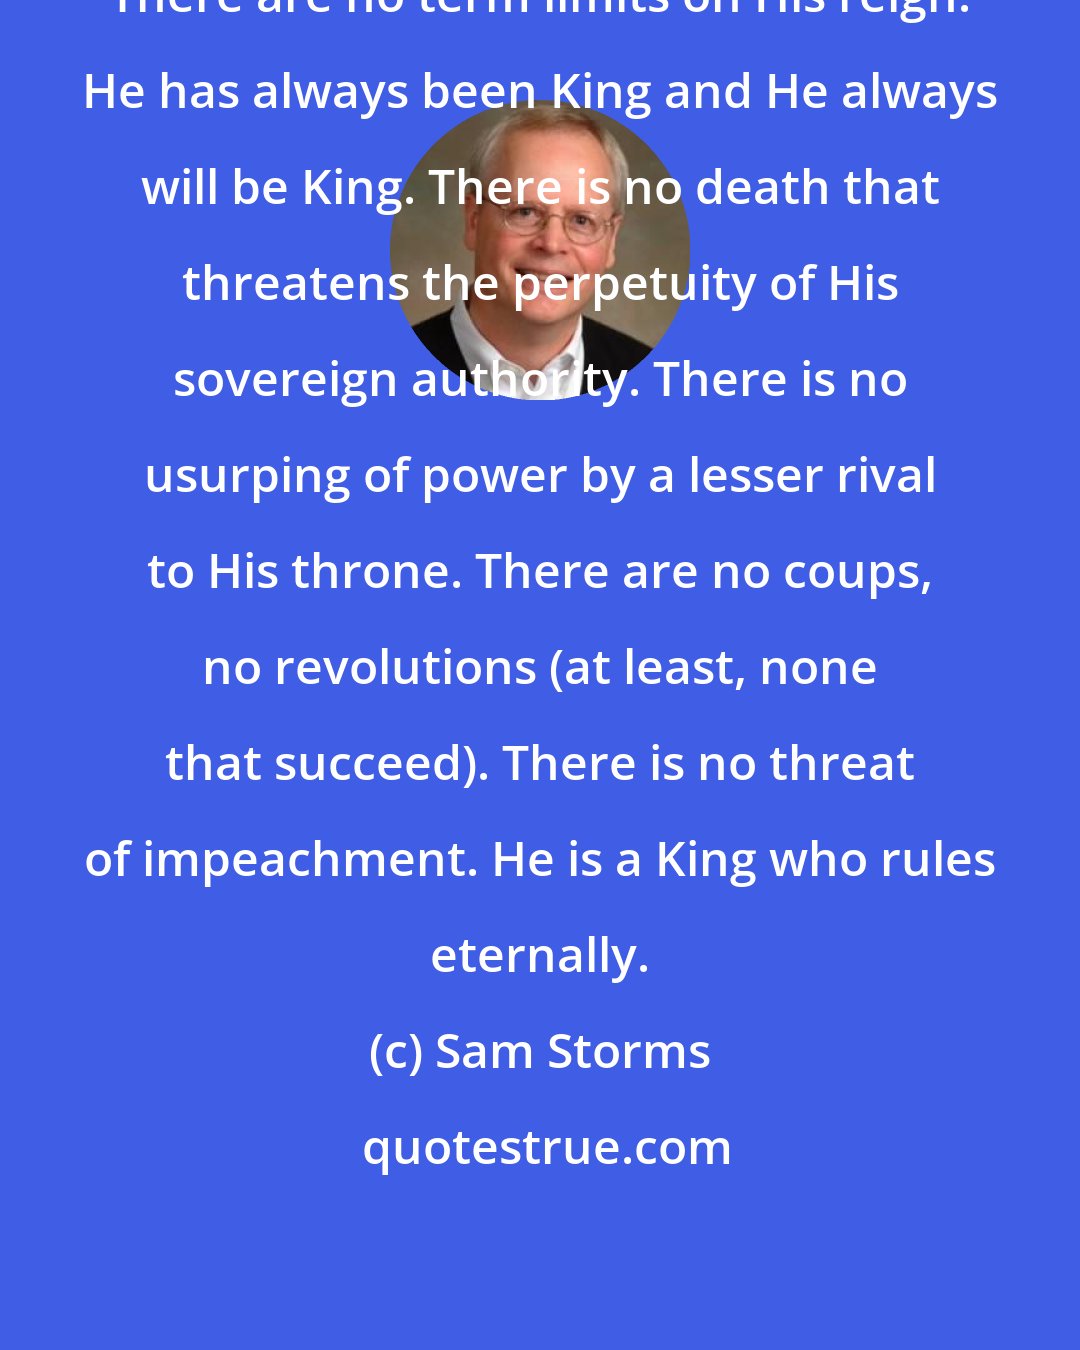 Sam Storms: There are no term limits on His reign. He has always been King and He always will be King. There is no death that threatens the perpetuity of His sovereign authority. There is no usurping of power by a lesser rival to His throne. There are no coups, no revolutions (at least, none that succeed). There is no threat of impeachment. He is a King who rules eternally.